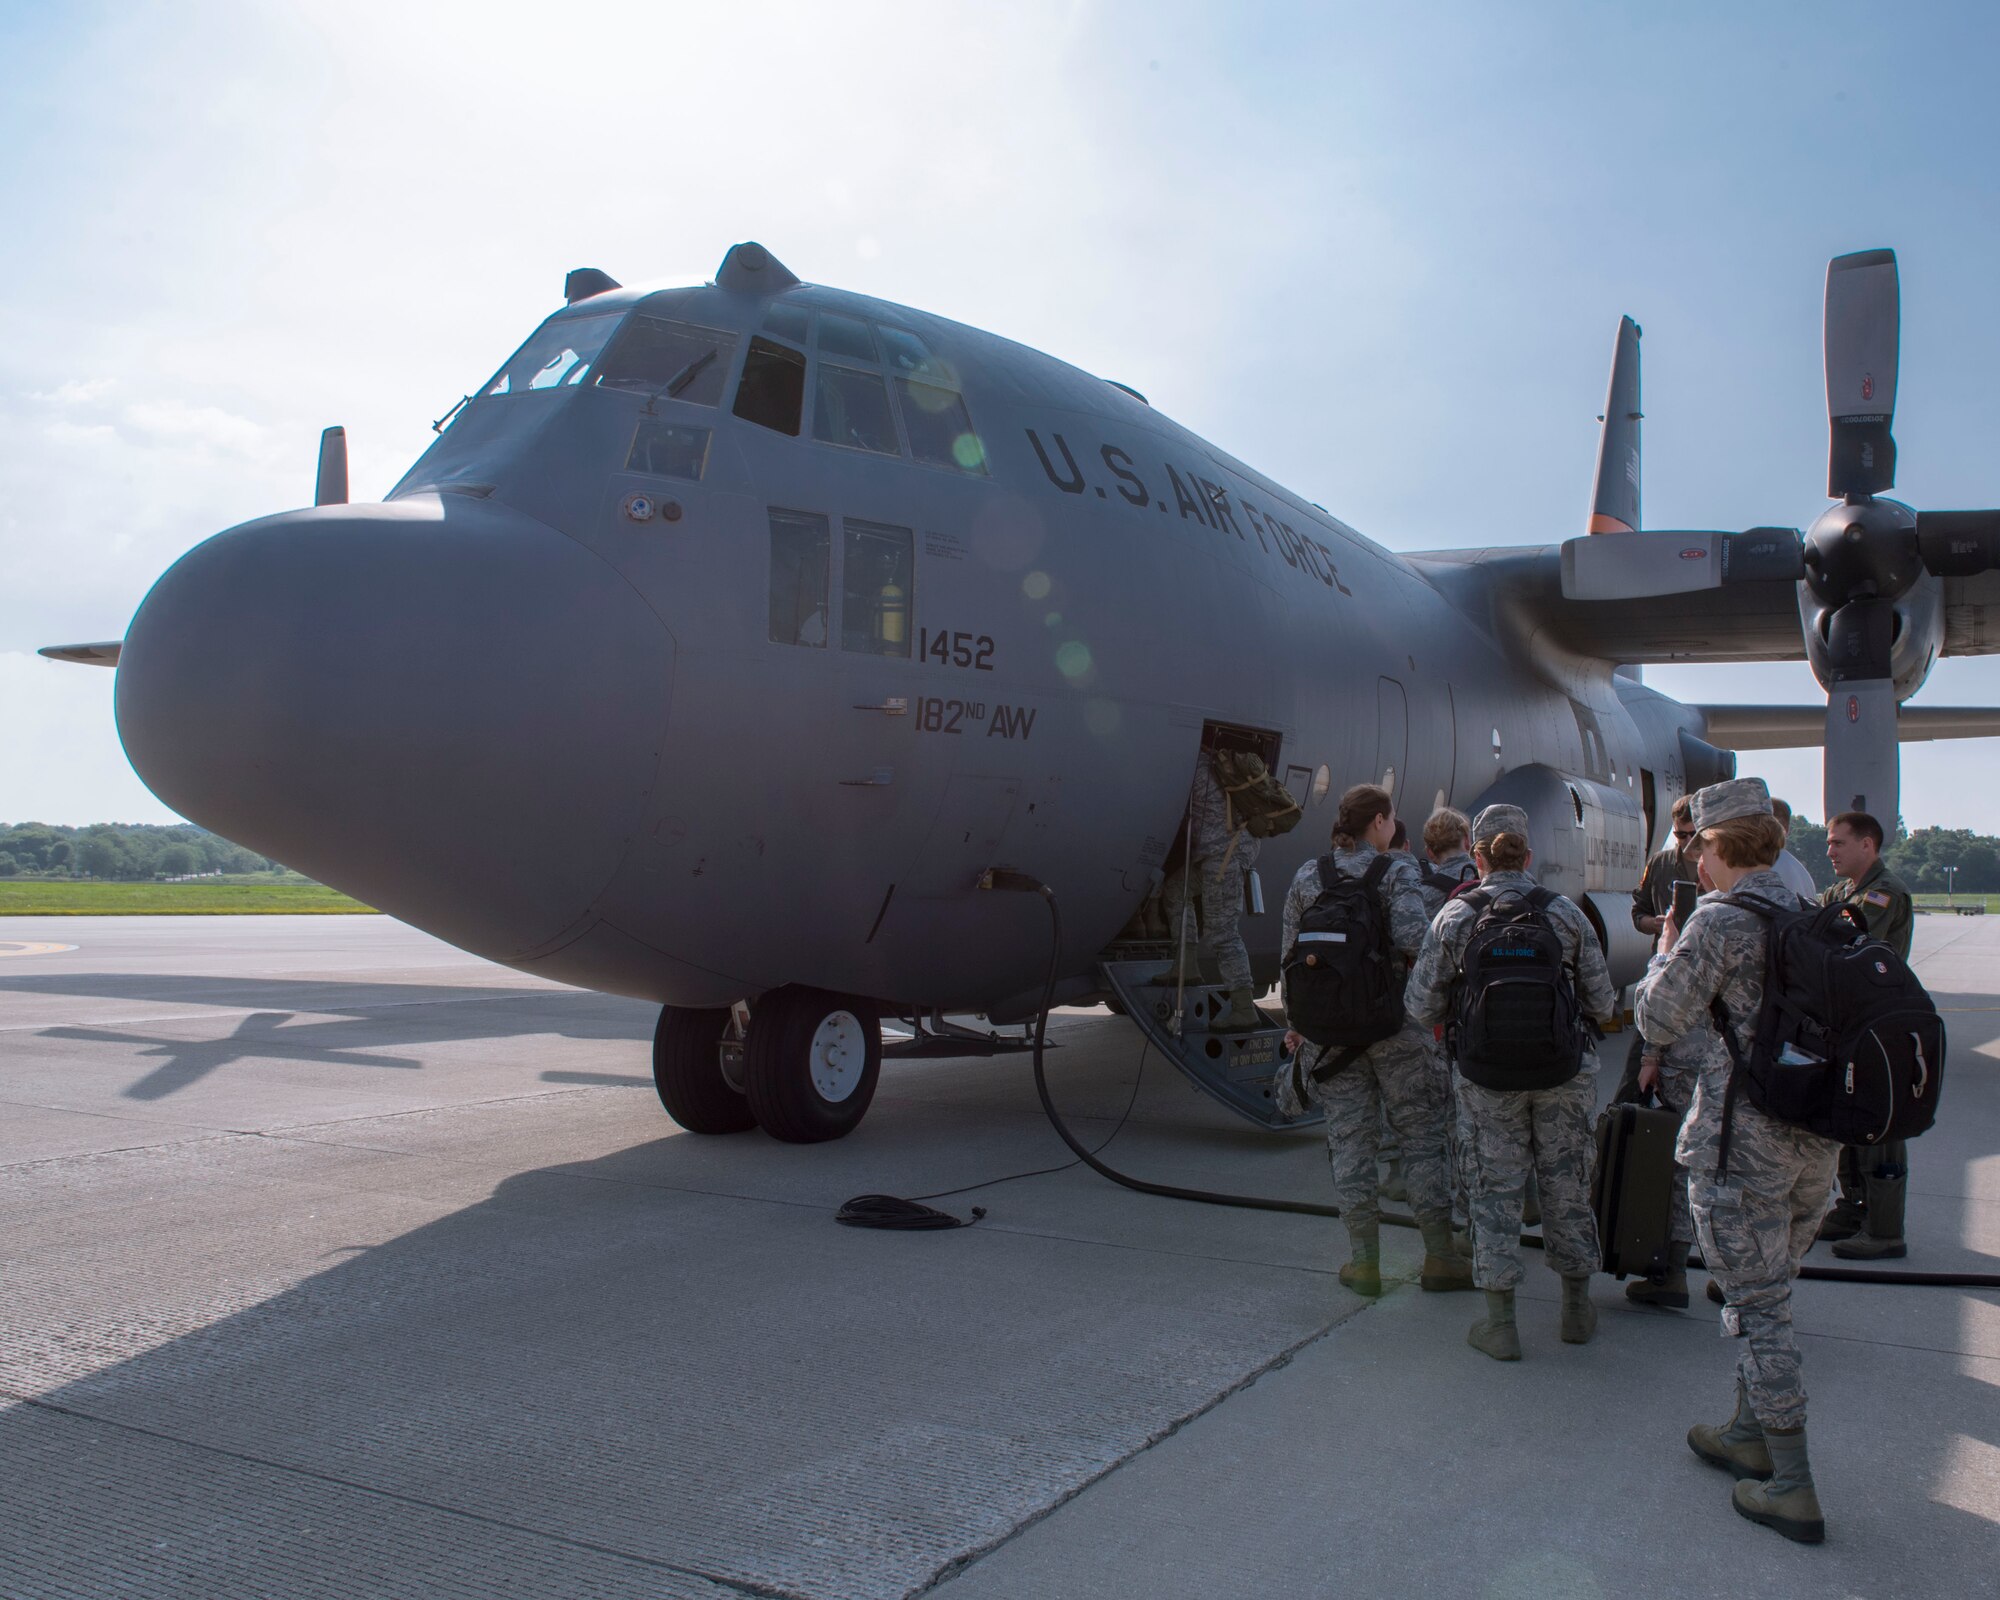 Airmen assigned to the 115th Fighter Wing, Madison, Wisconsin, board an Illinois Air National Guard C-130 Hercules for transport to New York July 9, 2019, for the Greater Chenango Cares and Healthy Cortland Innovative Readiness Training. The IRT mission is comprised of Active Duty Air Force, Army, Navy, Reserves and National Guard troops working alongside our local community partners to bring health care and veterinary services to the underserved communities of Cortland and Chenango counties. (U.S. Air National Guard photo by Airman 1st Class Cameron Lewis)